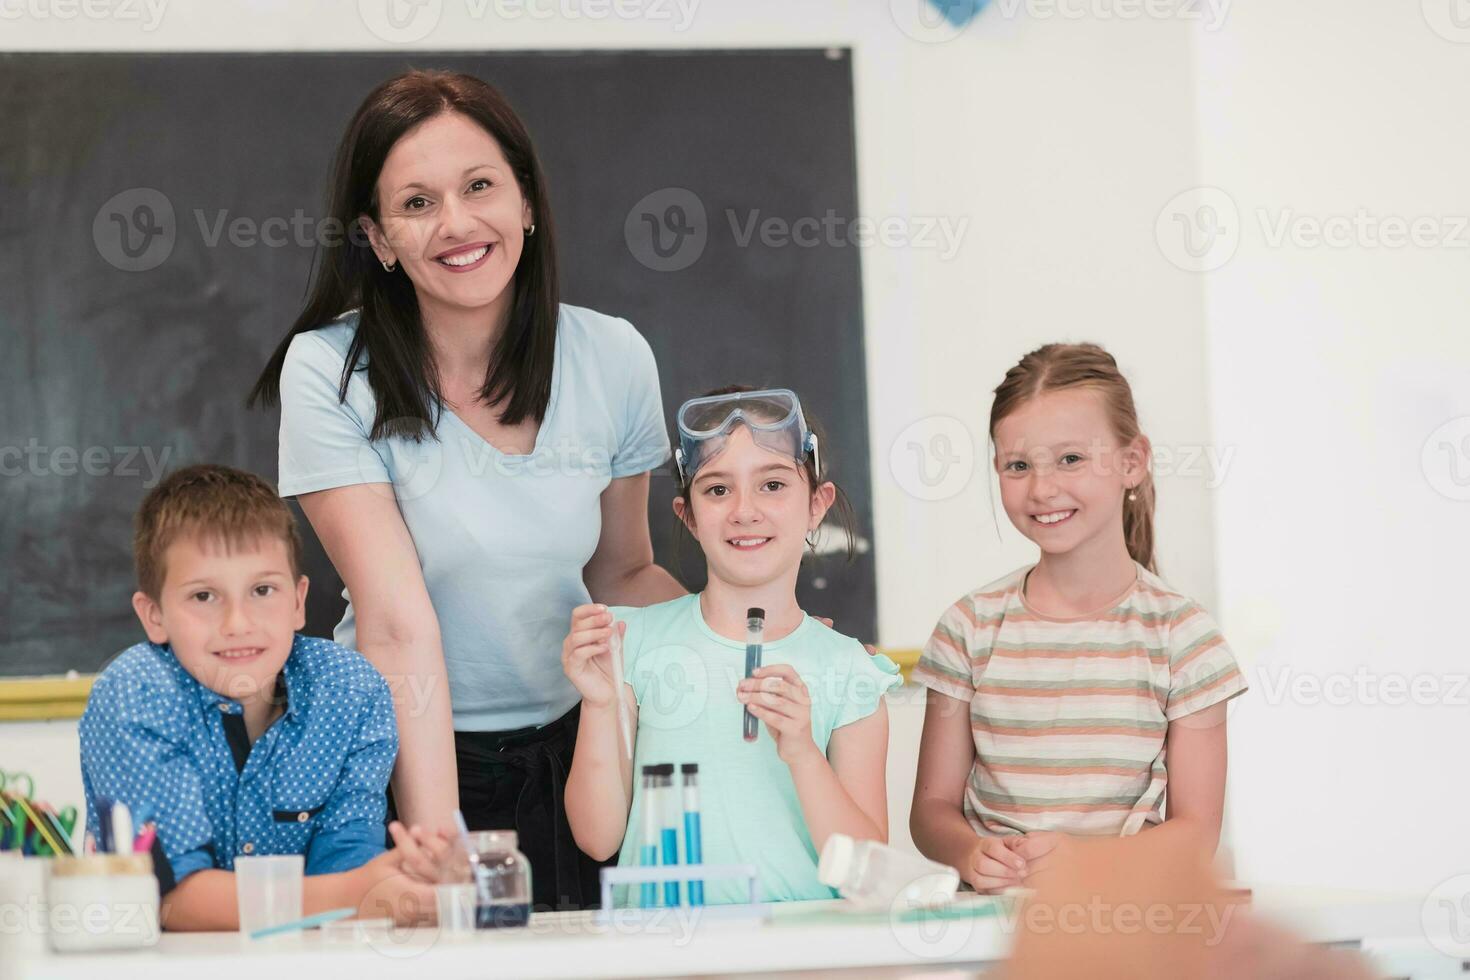 Elementary School Science Classroom Enthusiastic Teacher Explains Chemistry to Diverse Group of Children, Little Boy Mixes Chemicals in Beakers. Children Learn with Interest photo